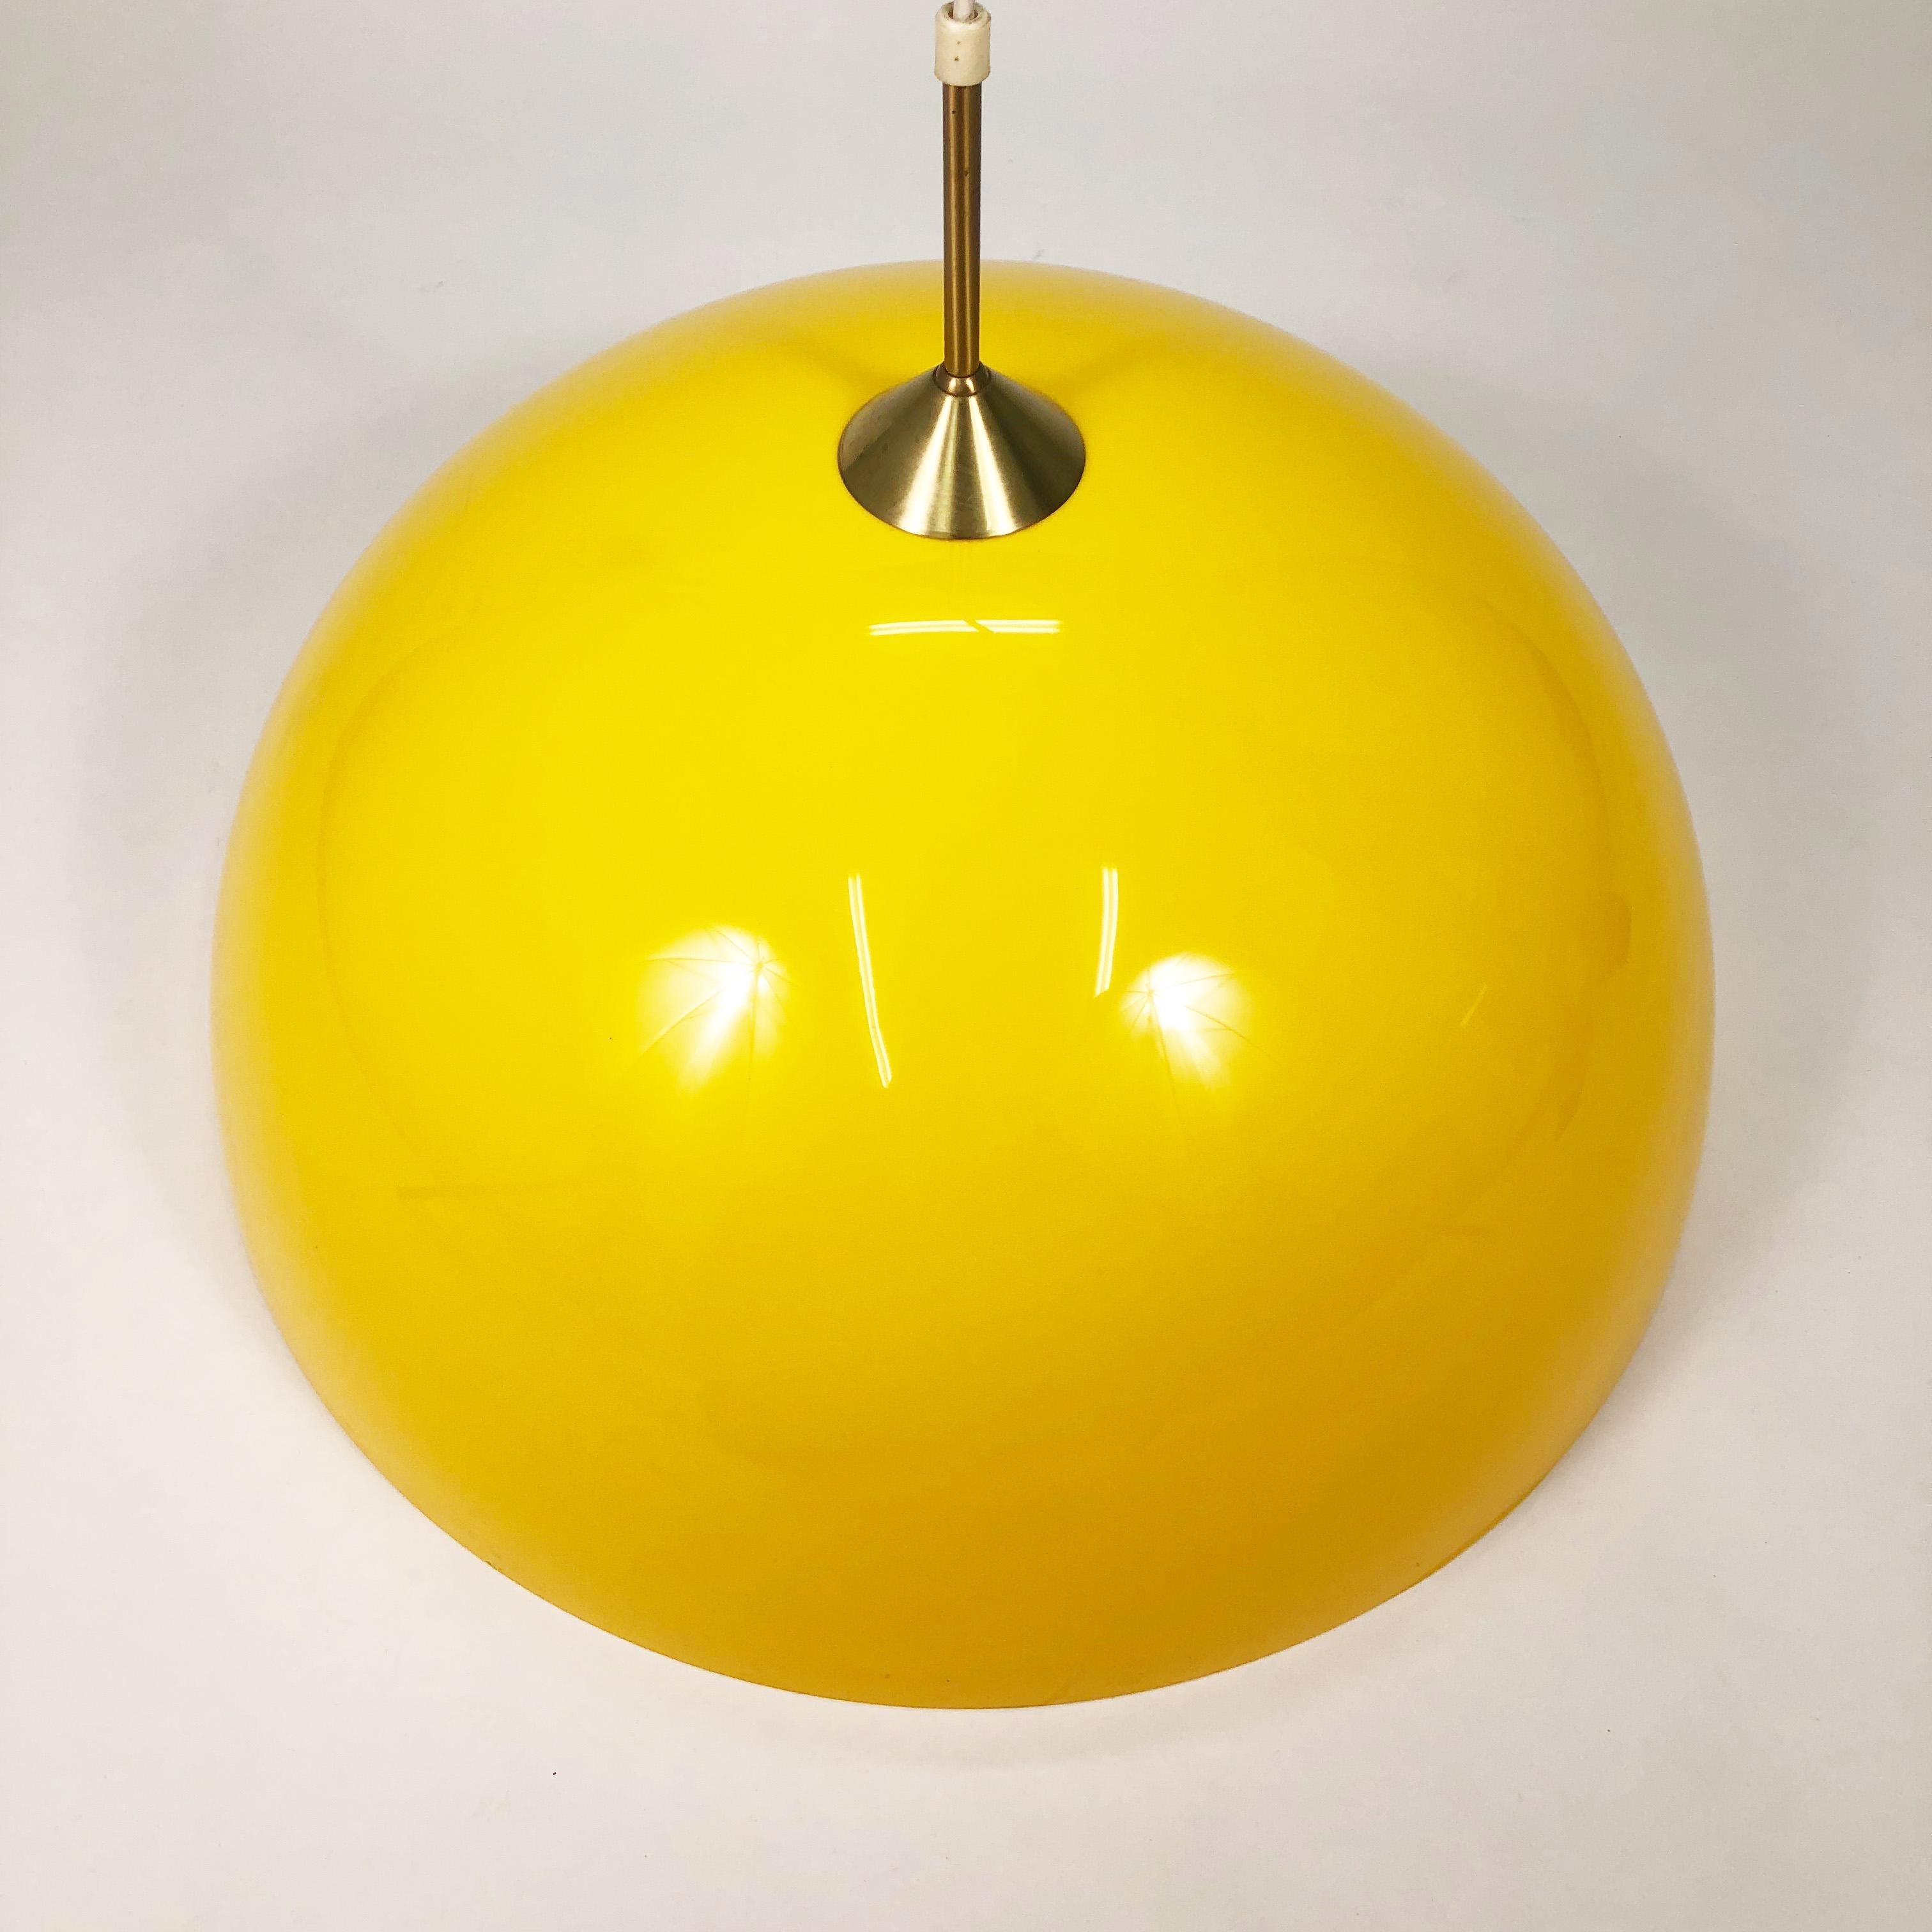 Vintage mid-century bright yellow dome pendant light by Prescolite.

Lucite with brass stem.

Measure: 53